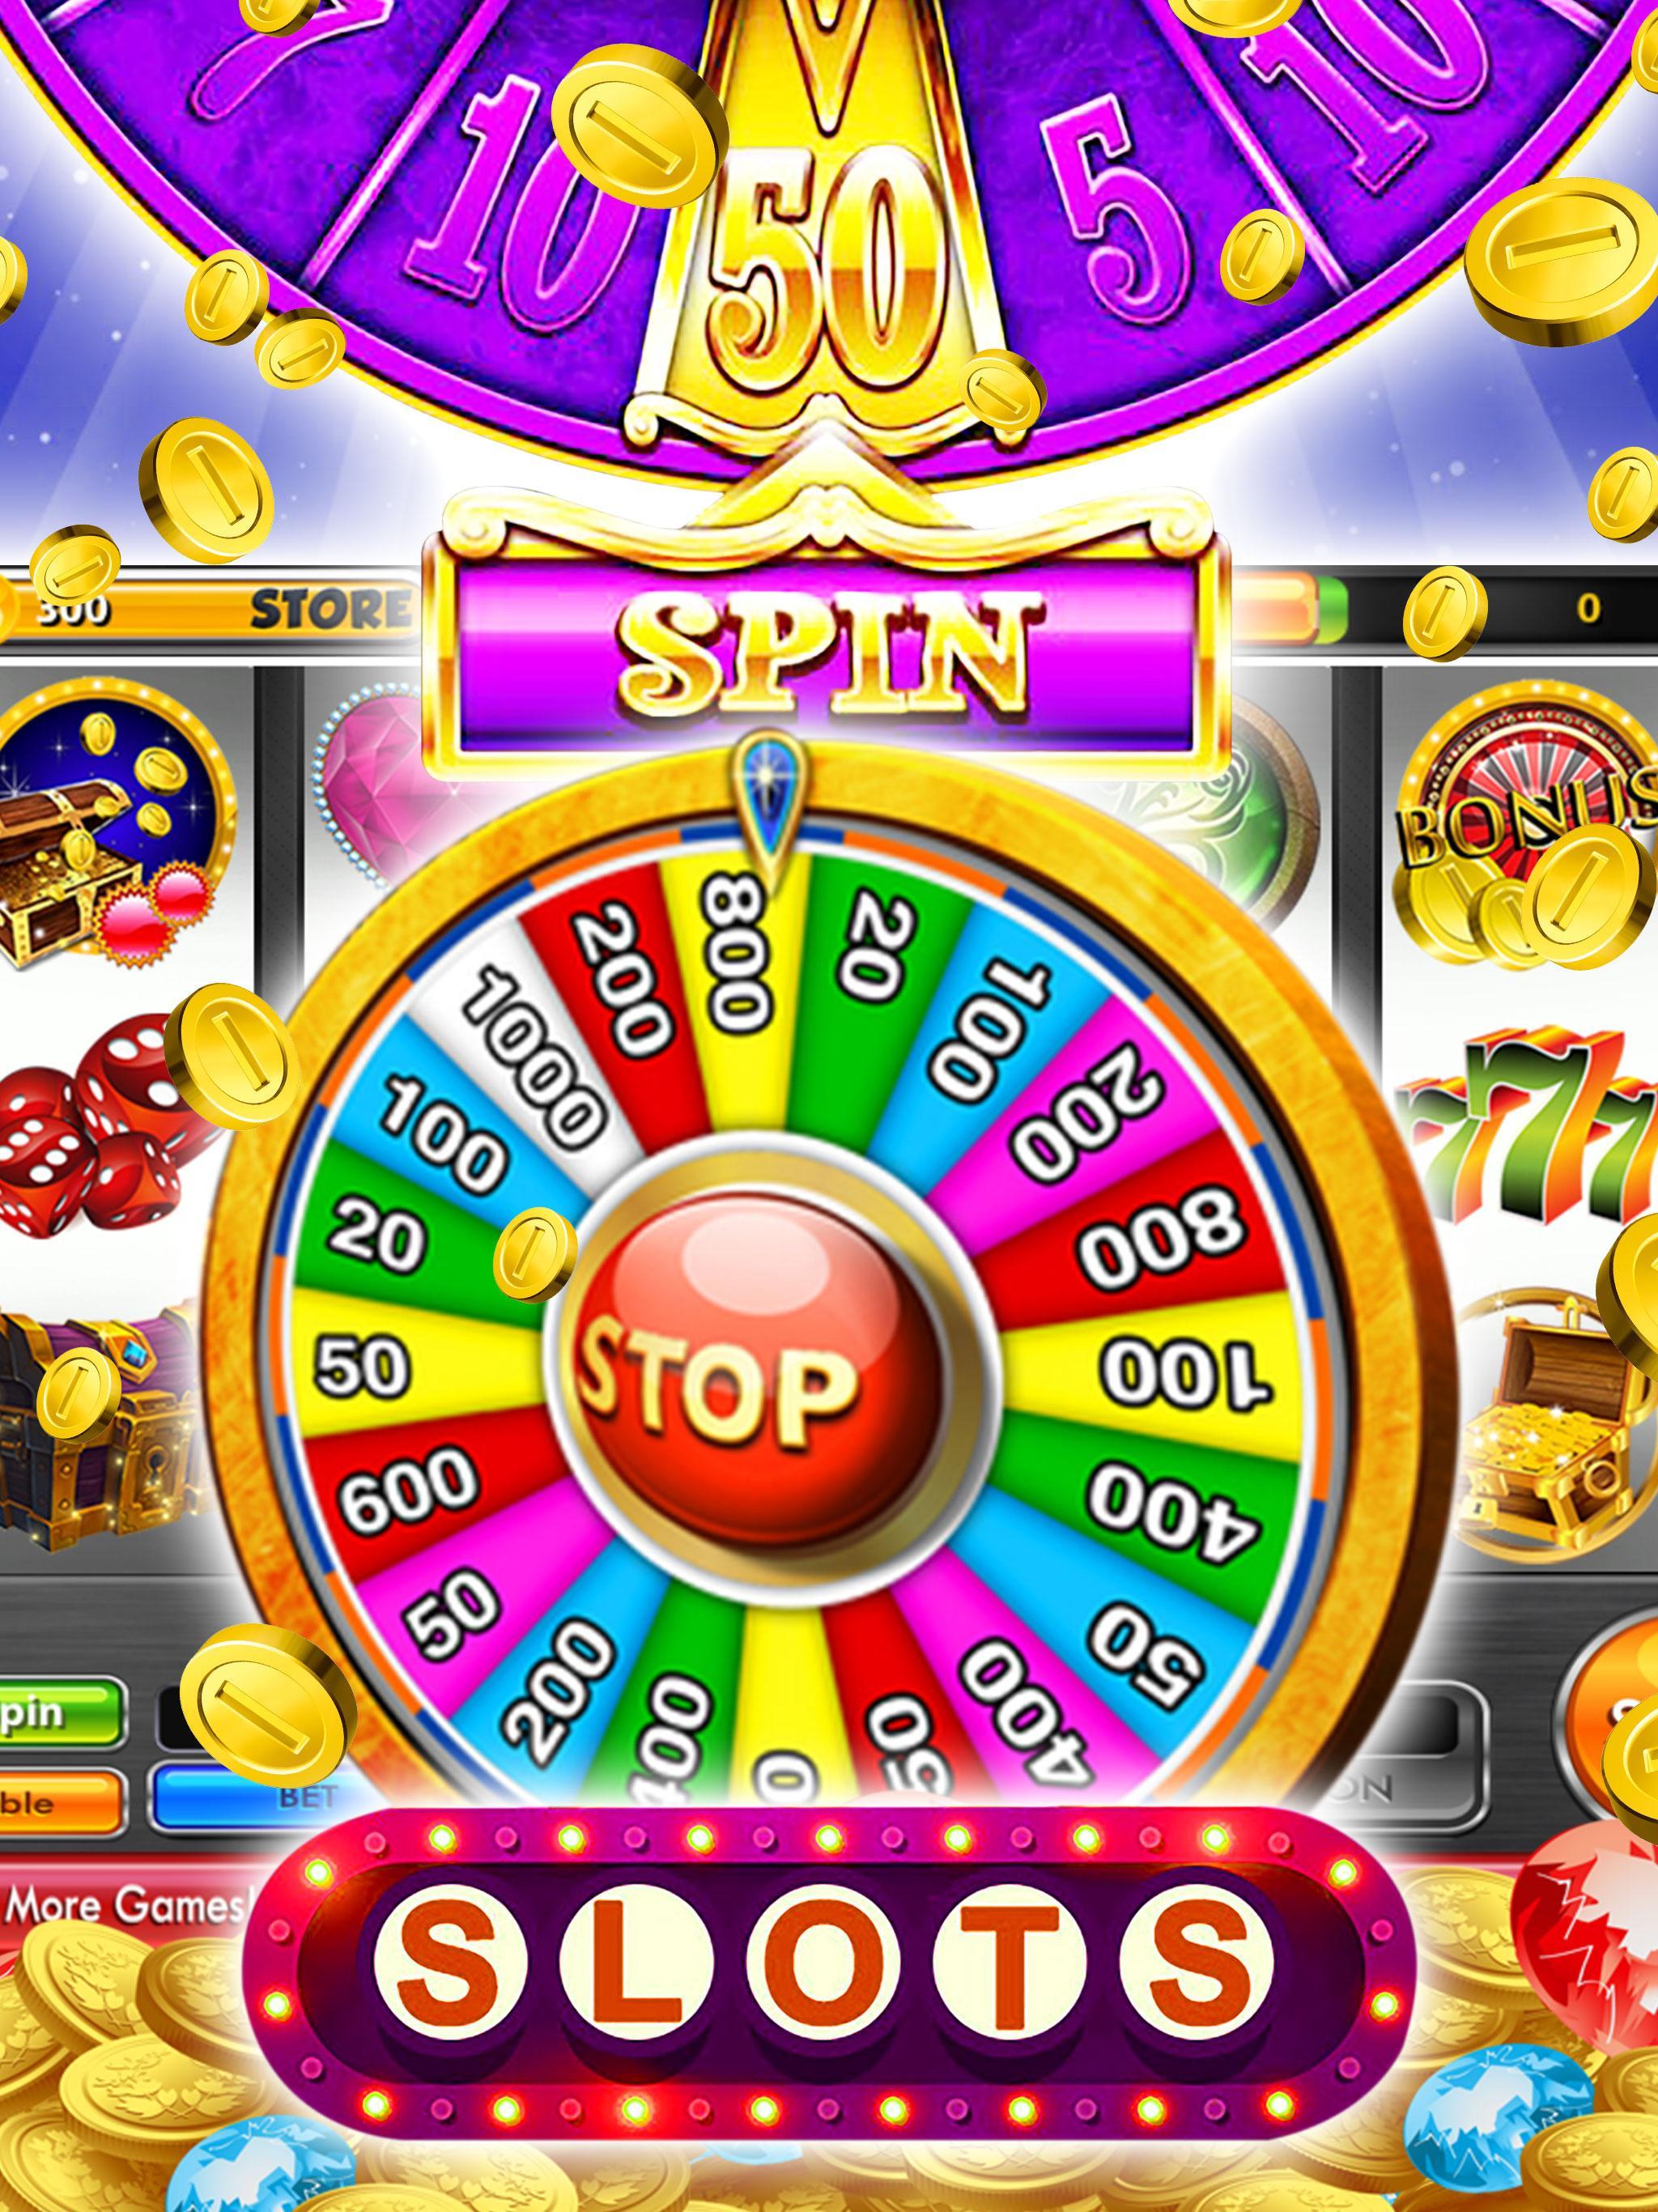 Heart of vegas download for android windows 10